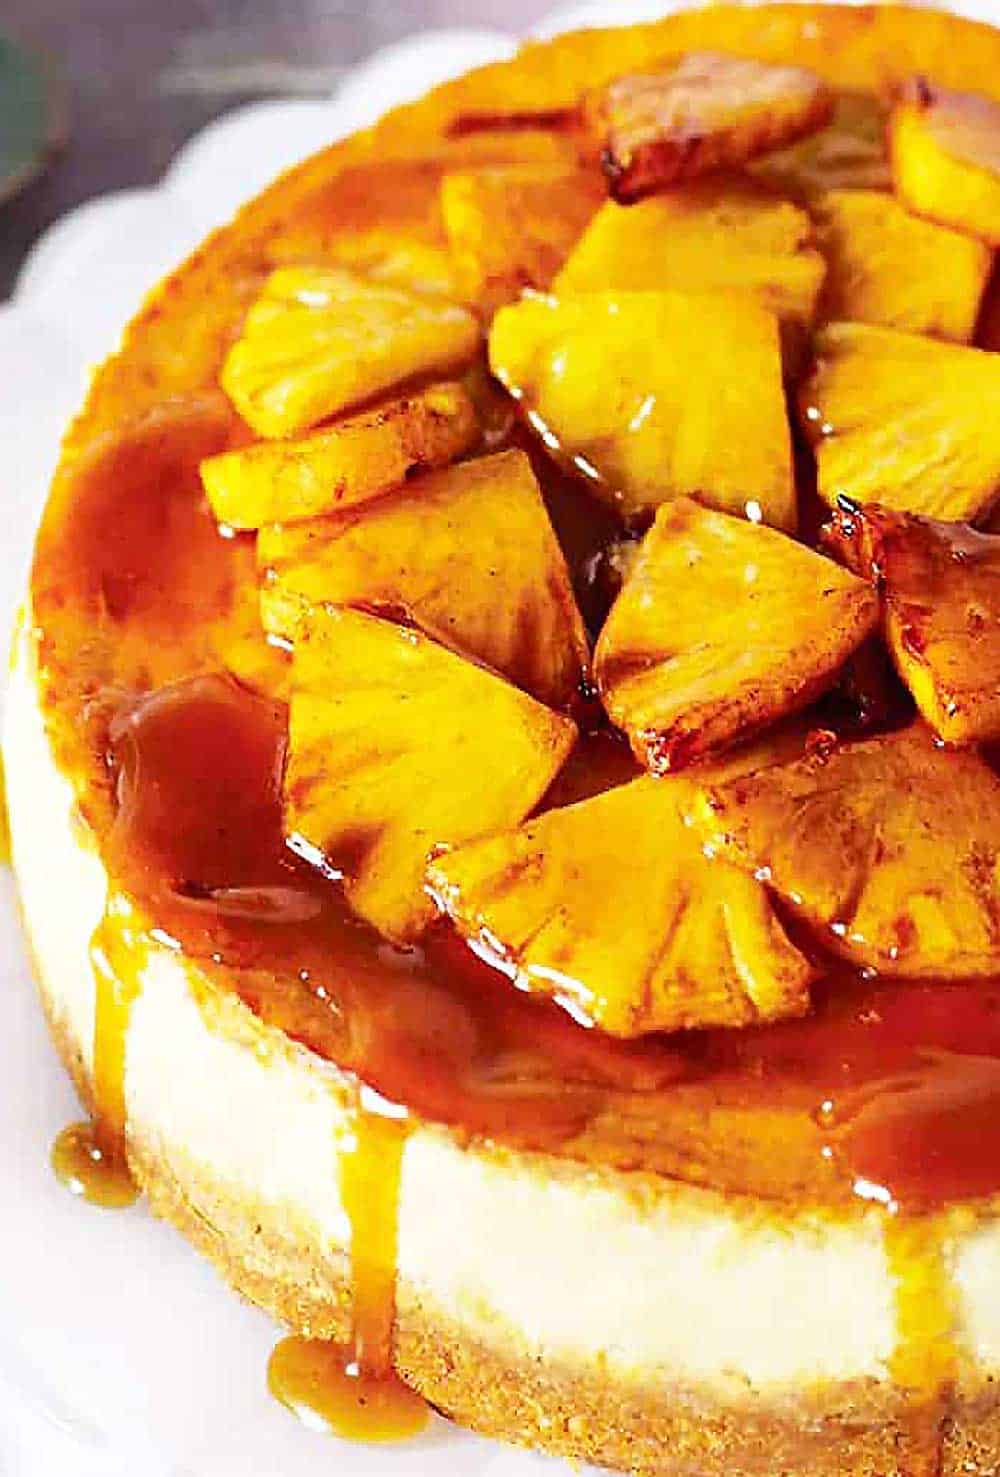 cheesecake topping made of caramelized pineapple pieces